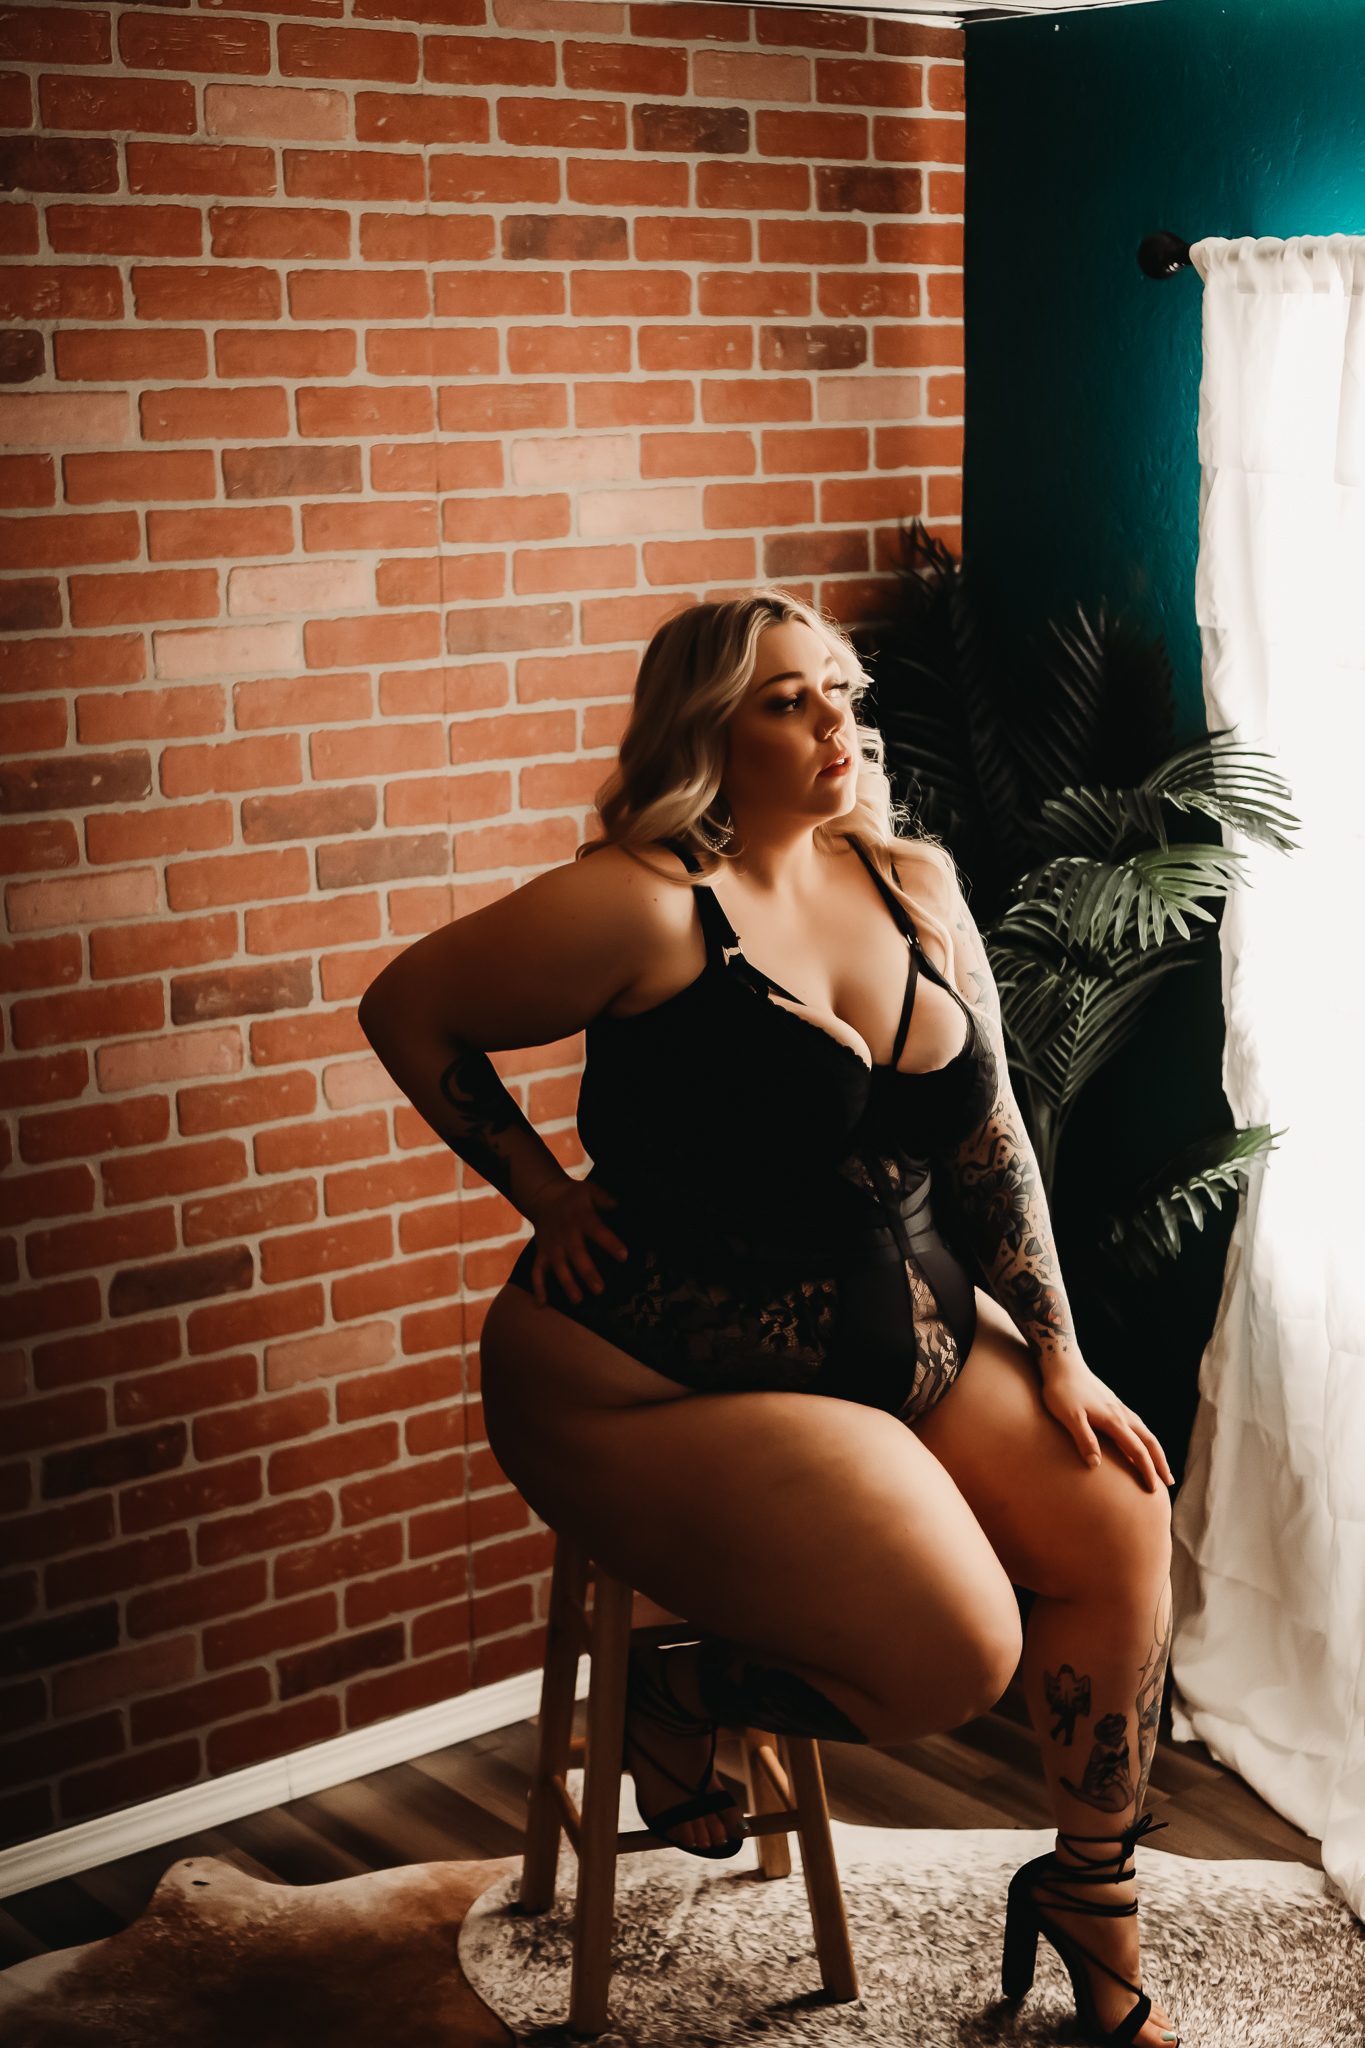 stl boudoir photographer finding the right photographer in st louis